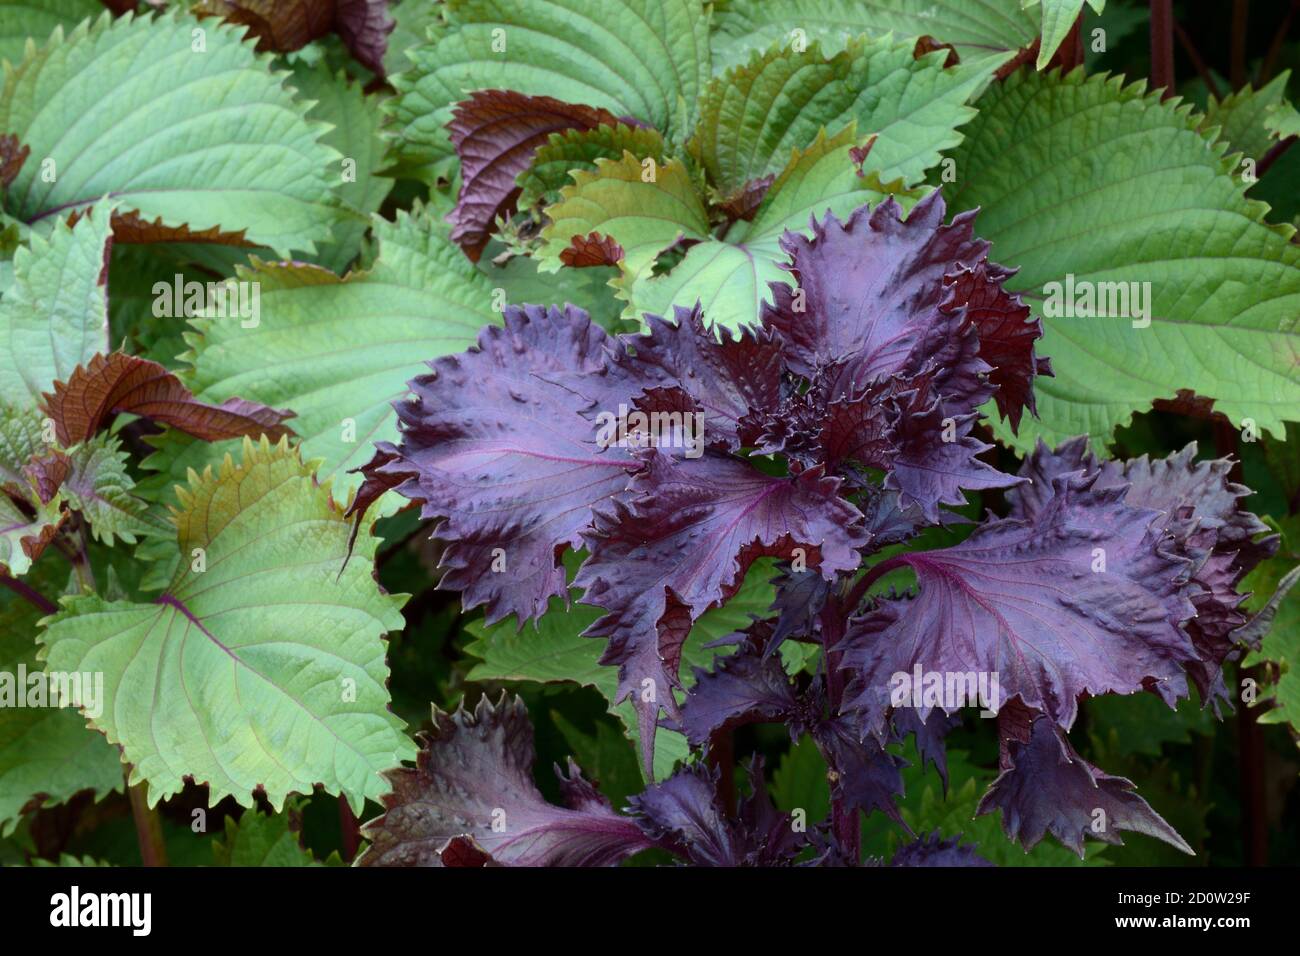 Green-leaved and red-leaved curly Perilla frutescens ( Perilla frutescens) Shiso, Germany, Europe Stock Photo